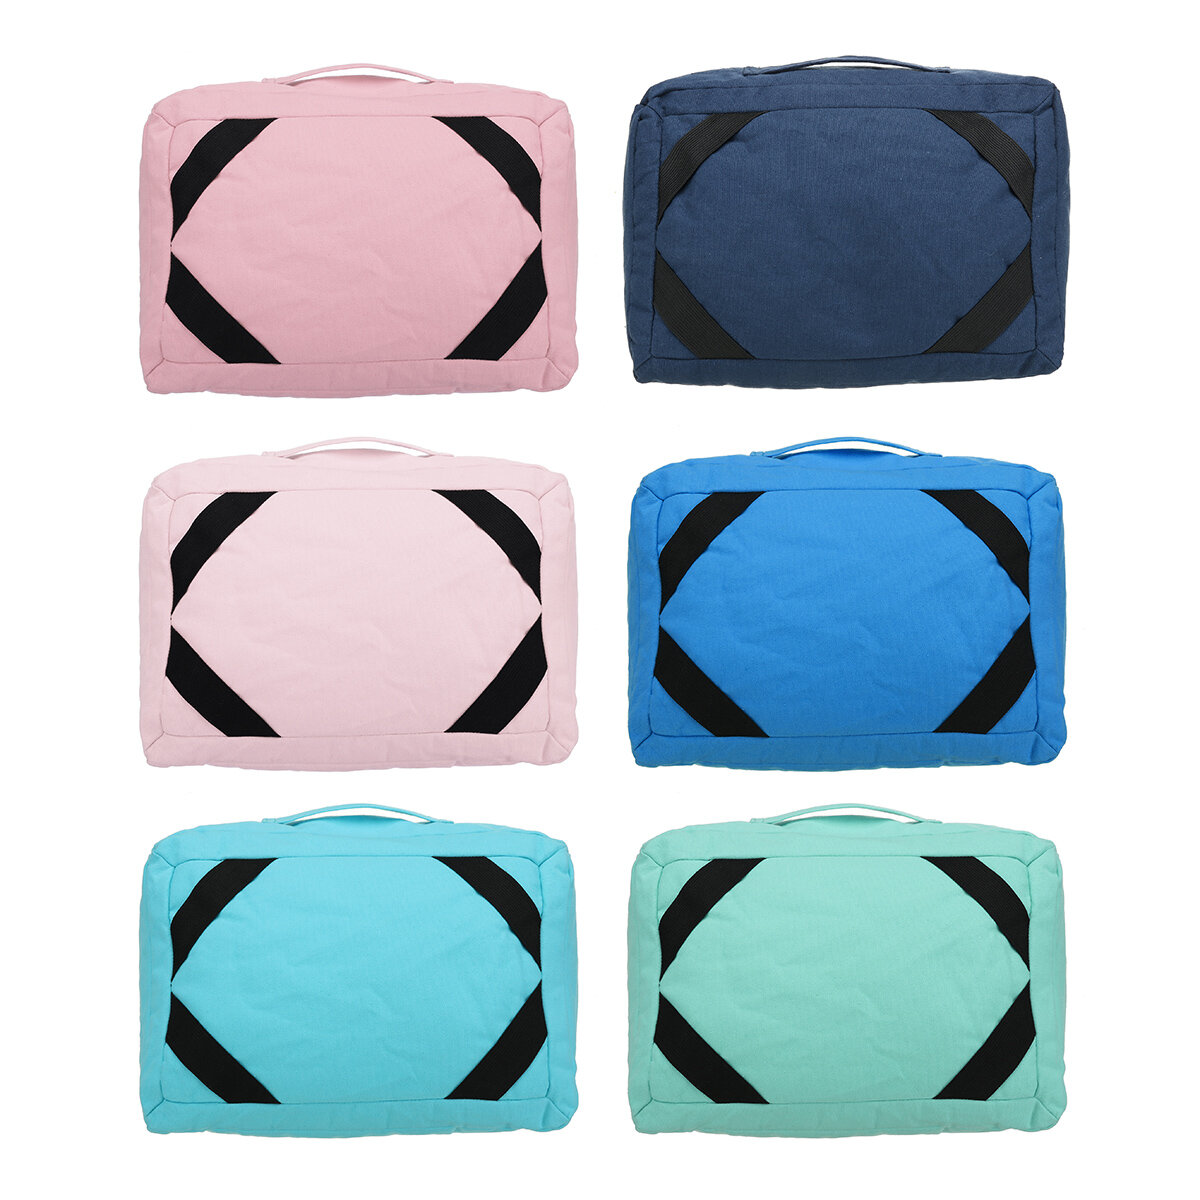 Pillow Holder Tablet Smartphone Holder Soft Pillow Cushion Soft Tablet Stand For Home Decoration COD